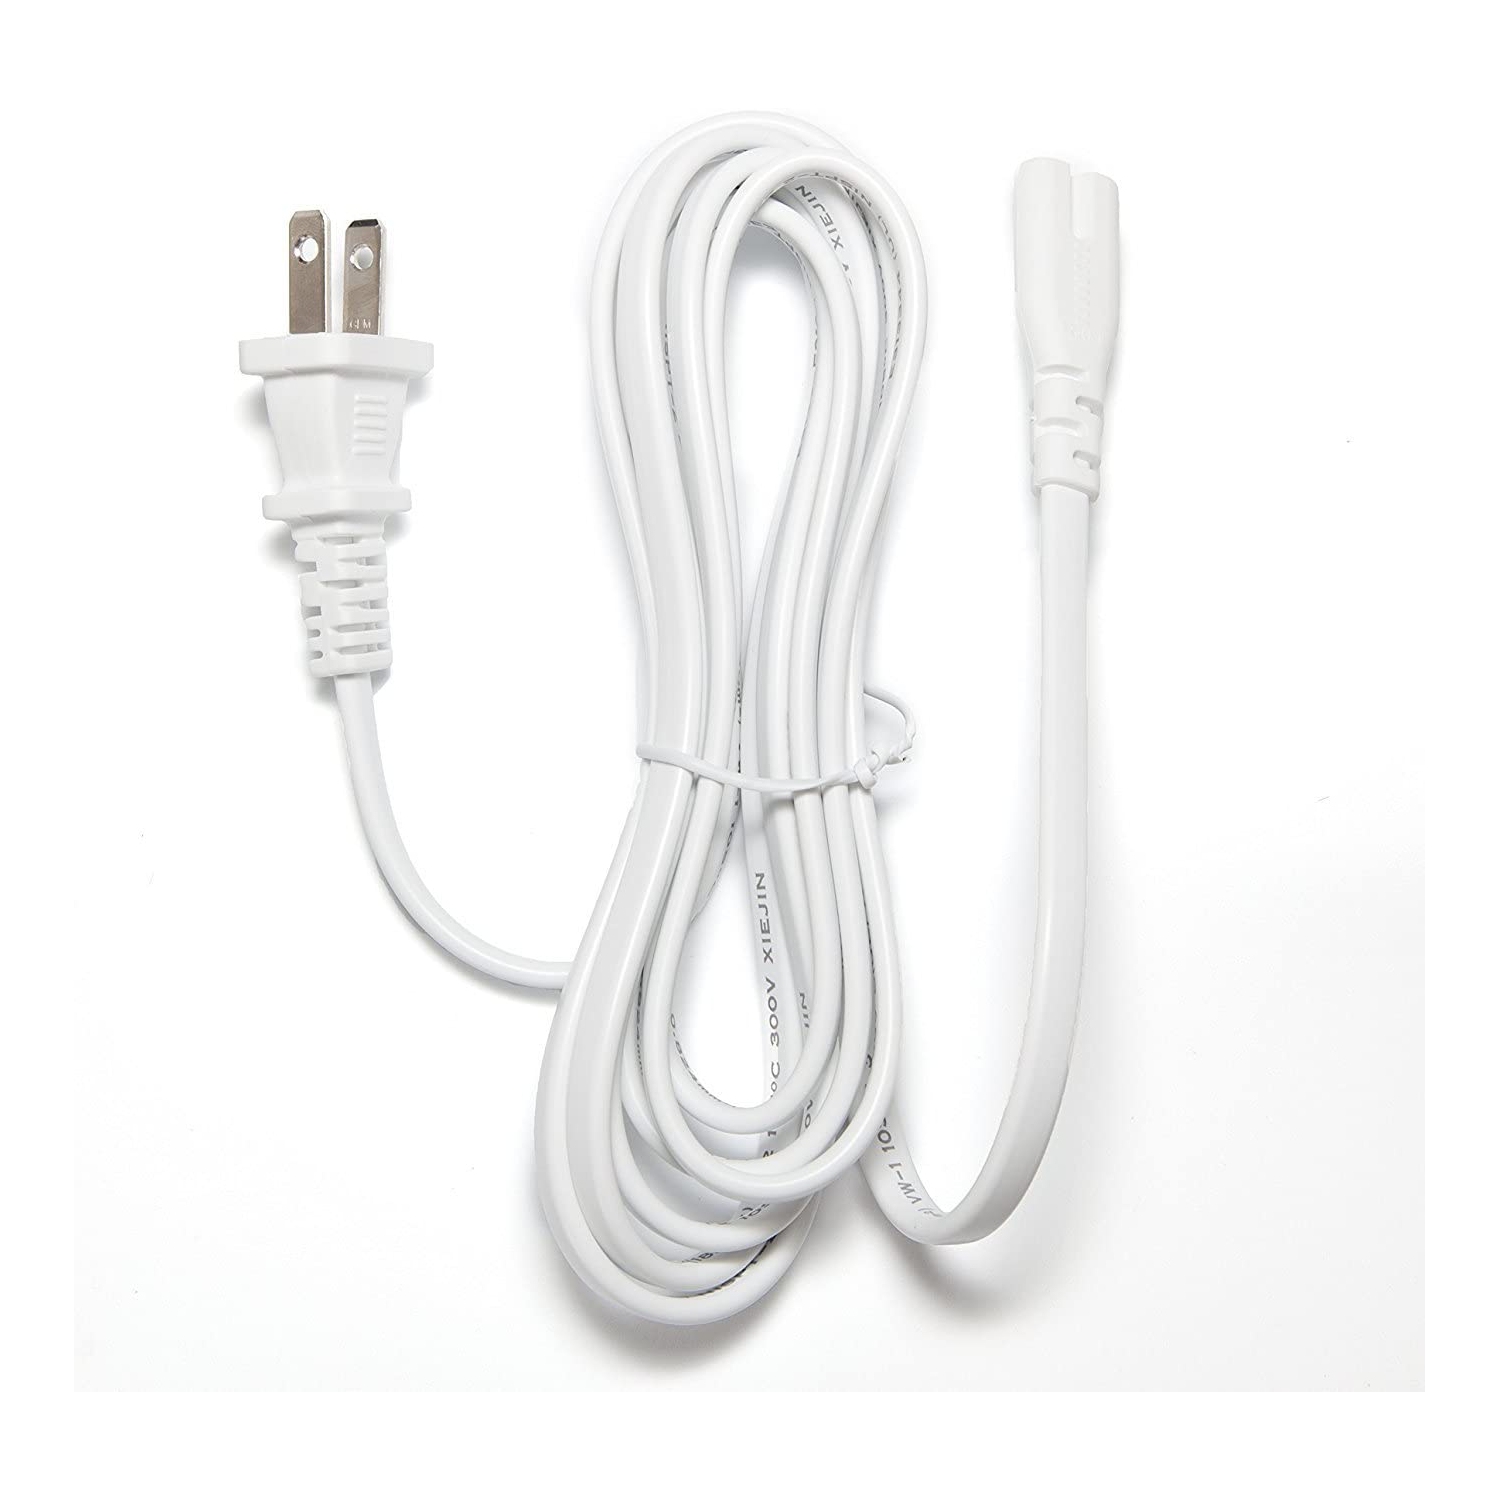 [UL LISTED] (White) 1.5 Meter AC Power Cord Compatible with Apple Airport Extreme/Time Capsule - 2TB / 3TB